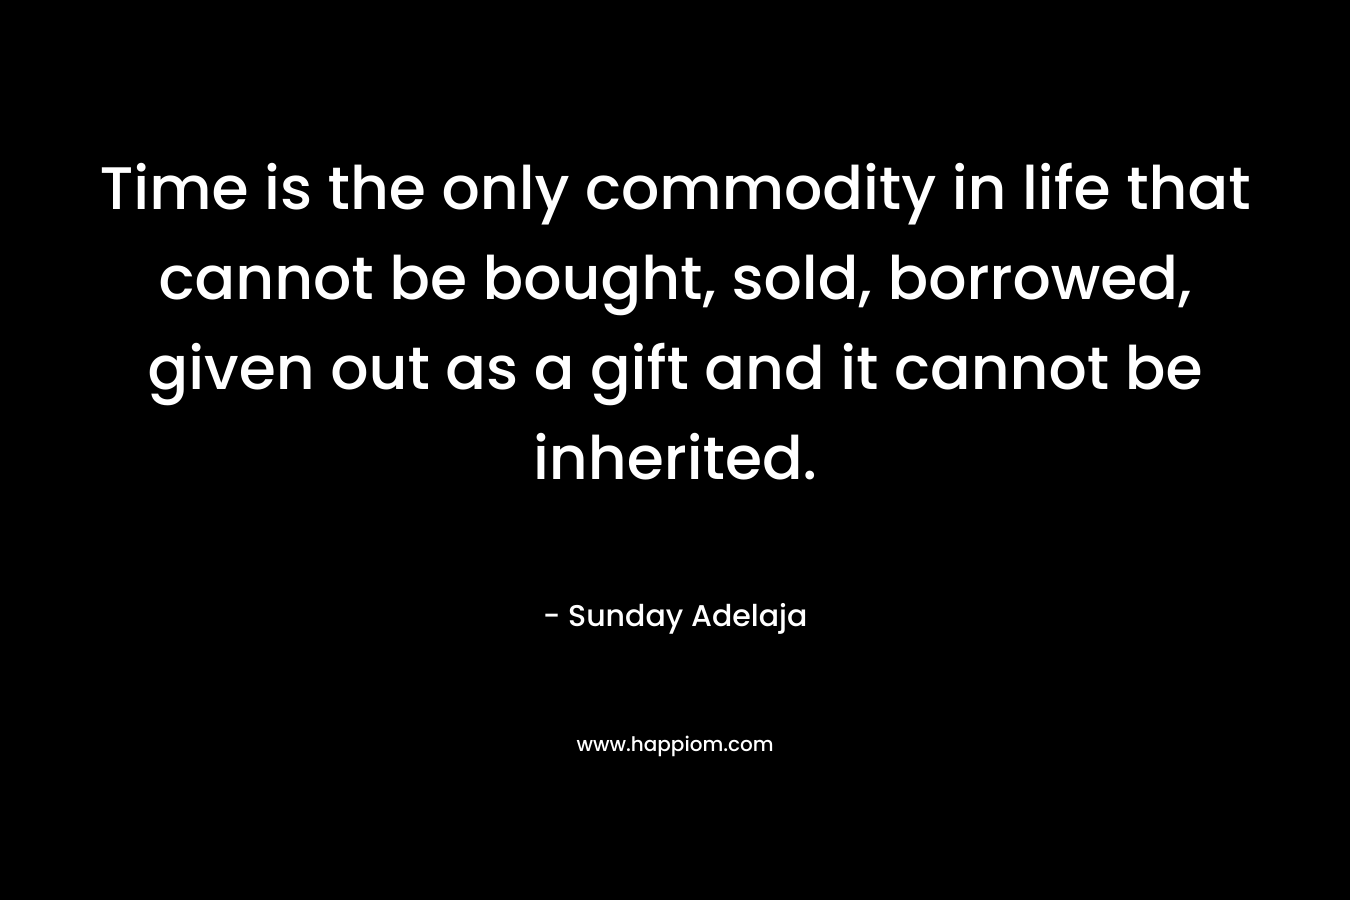 Time is the only commodity in life that cannot be bought, sold, borrowed, given out as a gift and it cannot be inherited.